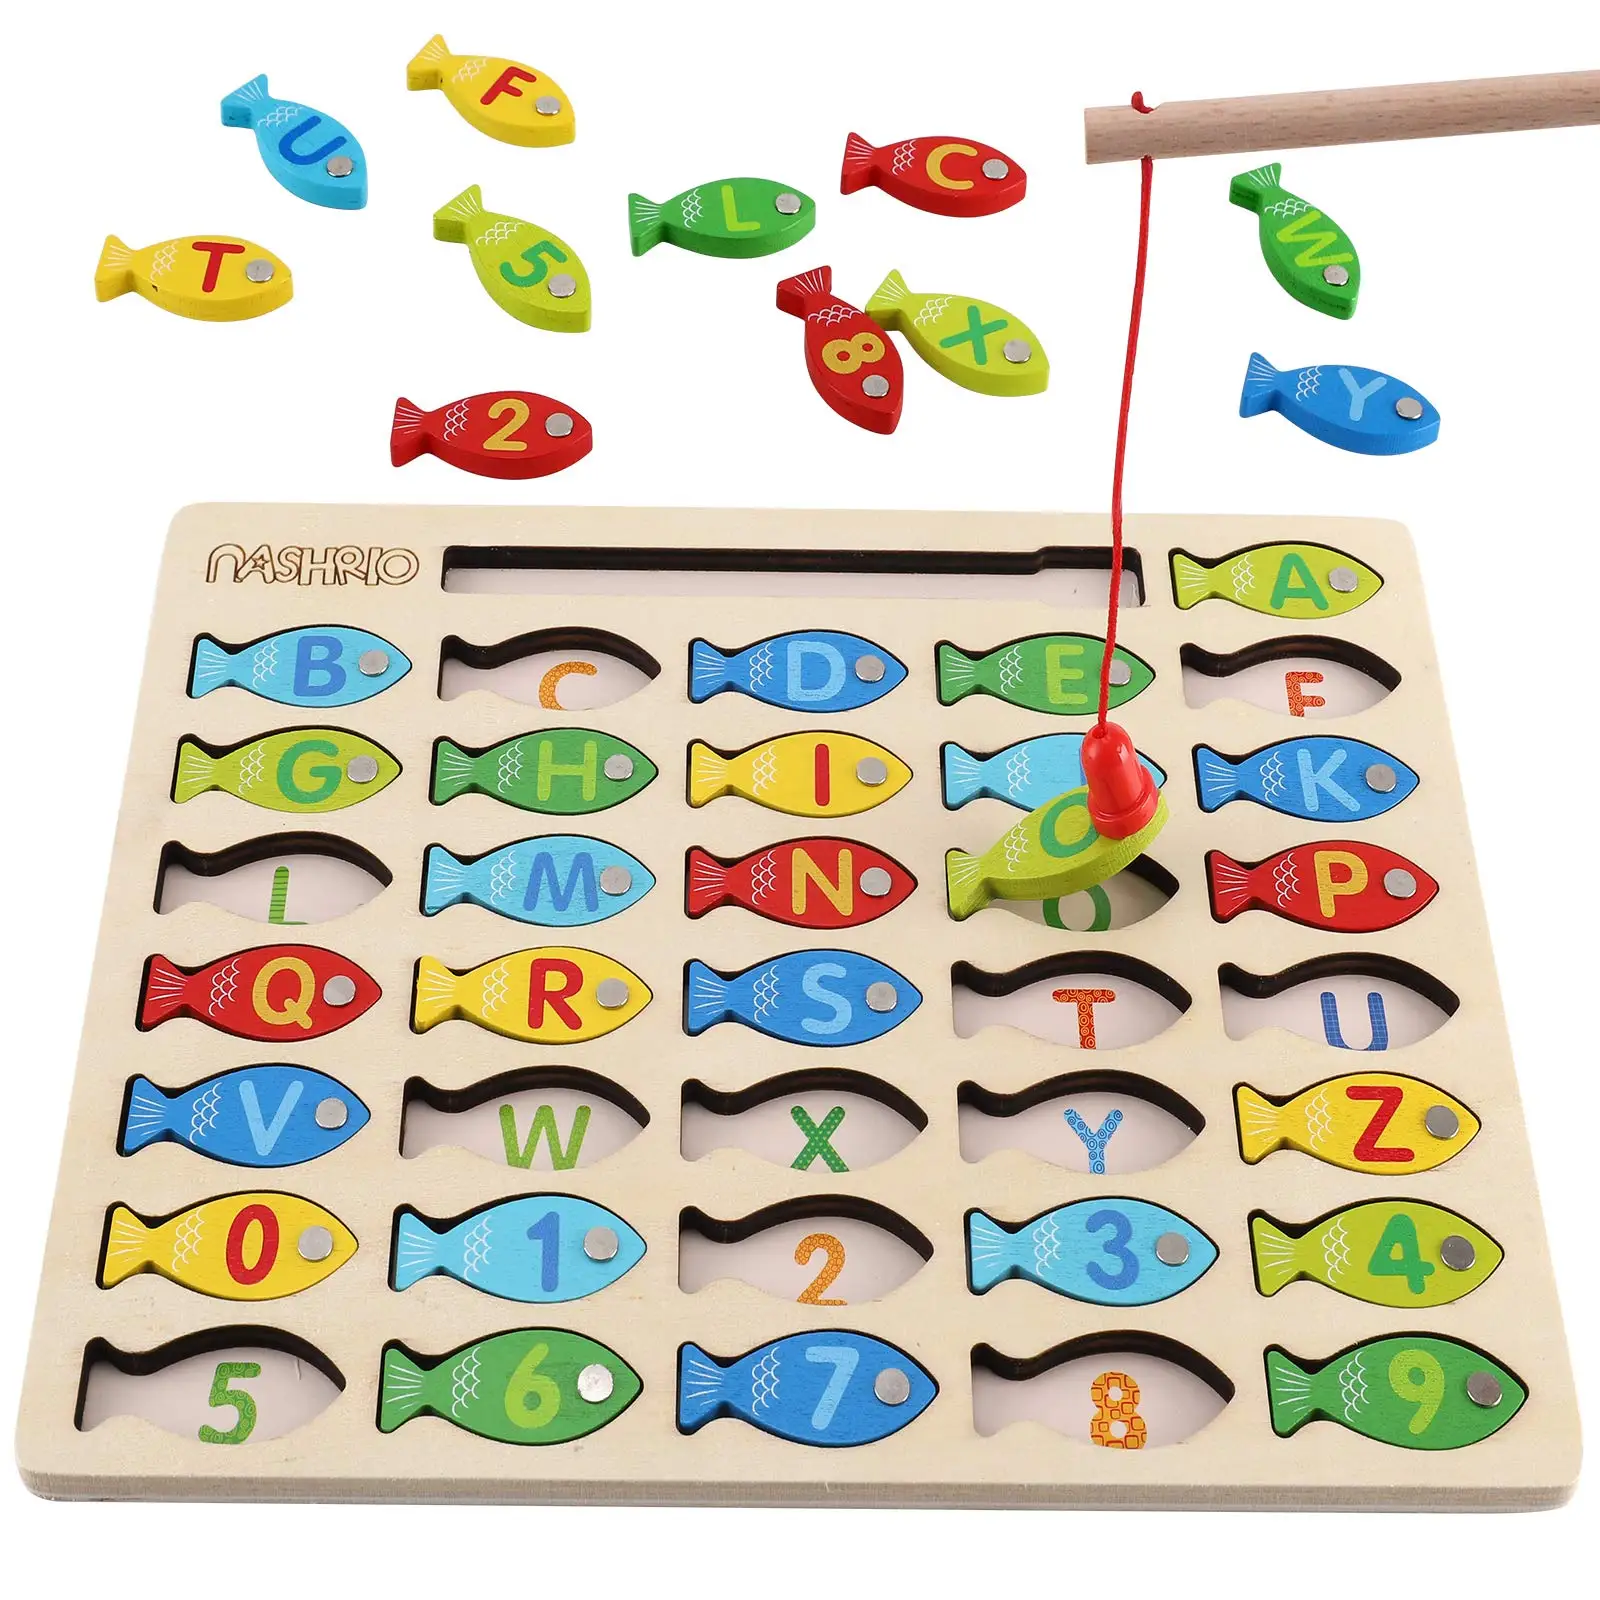 Soli Customized Creative Construction Children Educational Baby MDF Game Toys Wooden Magnetic Fishing with Rod Game Set for kids